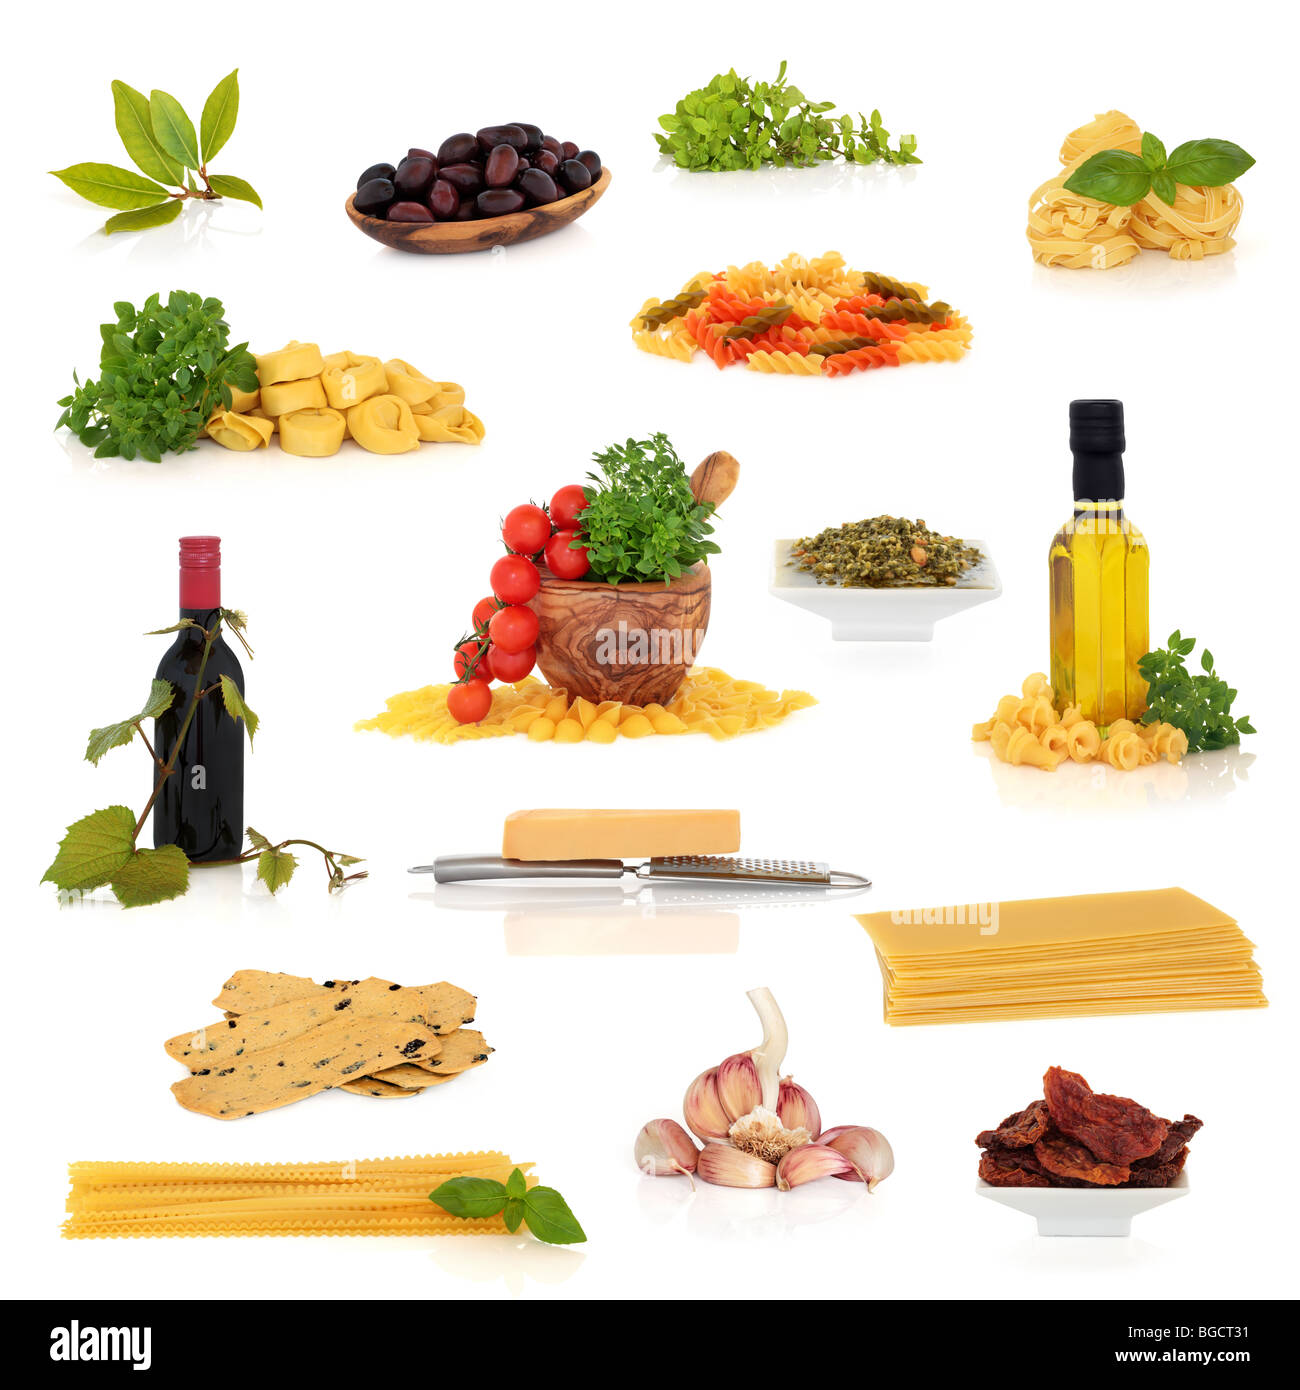 Large Italian food and drink collection isolated over white background. Stock Photo